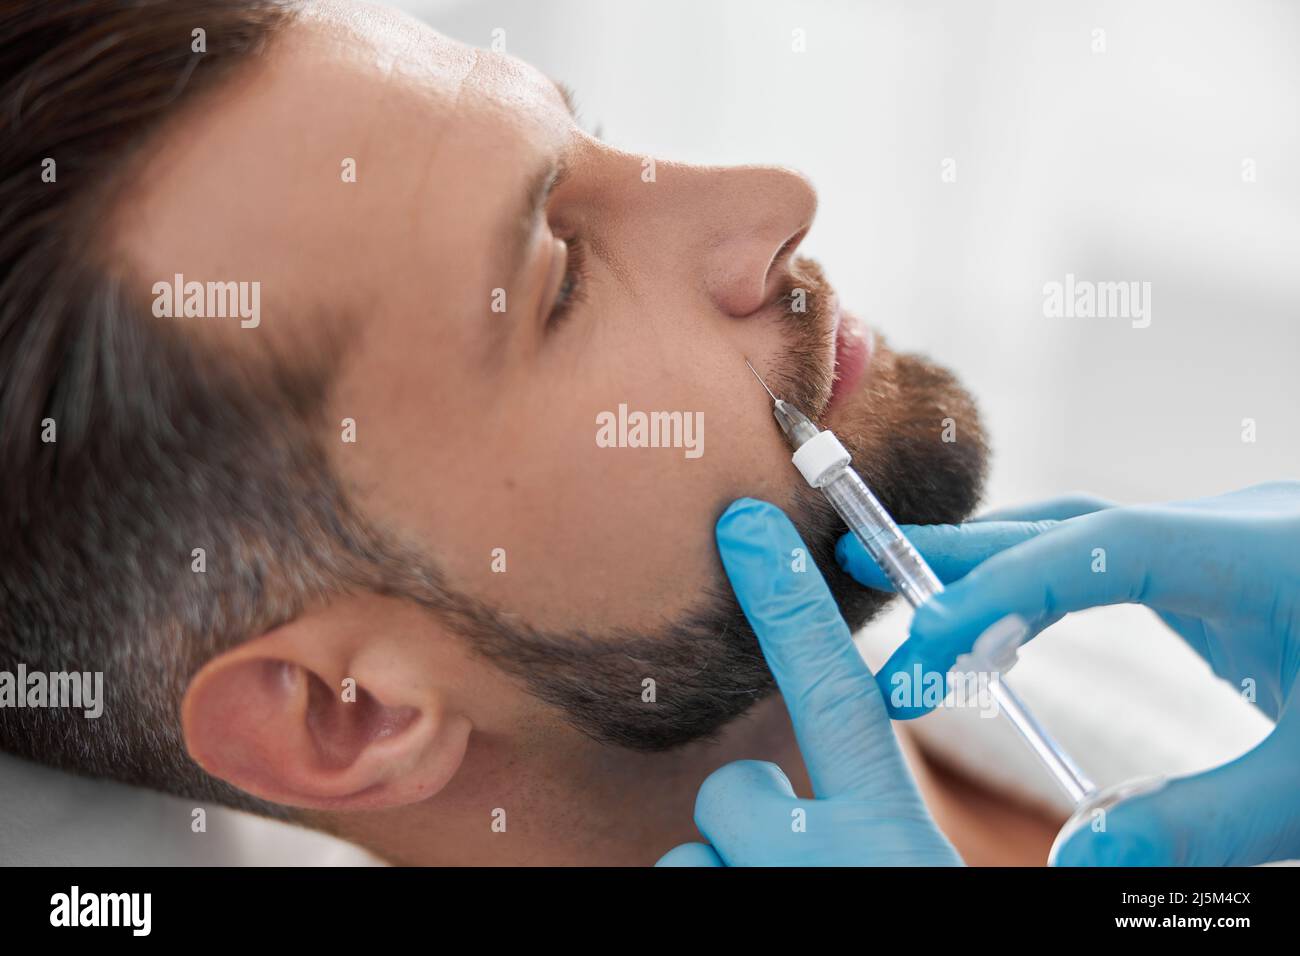 Mature person with beard undergoes nasolabial fold filler procedure with skilled beautician in salon Stock Photo